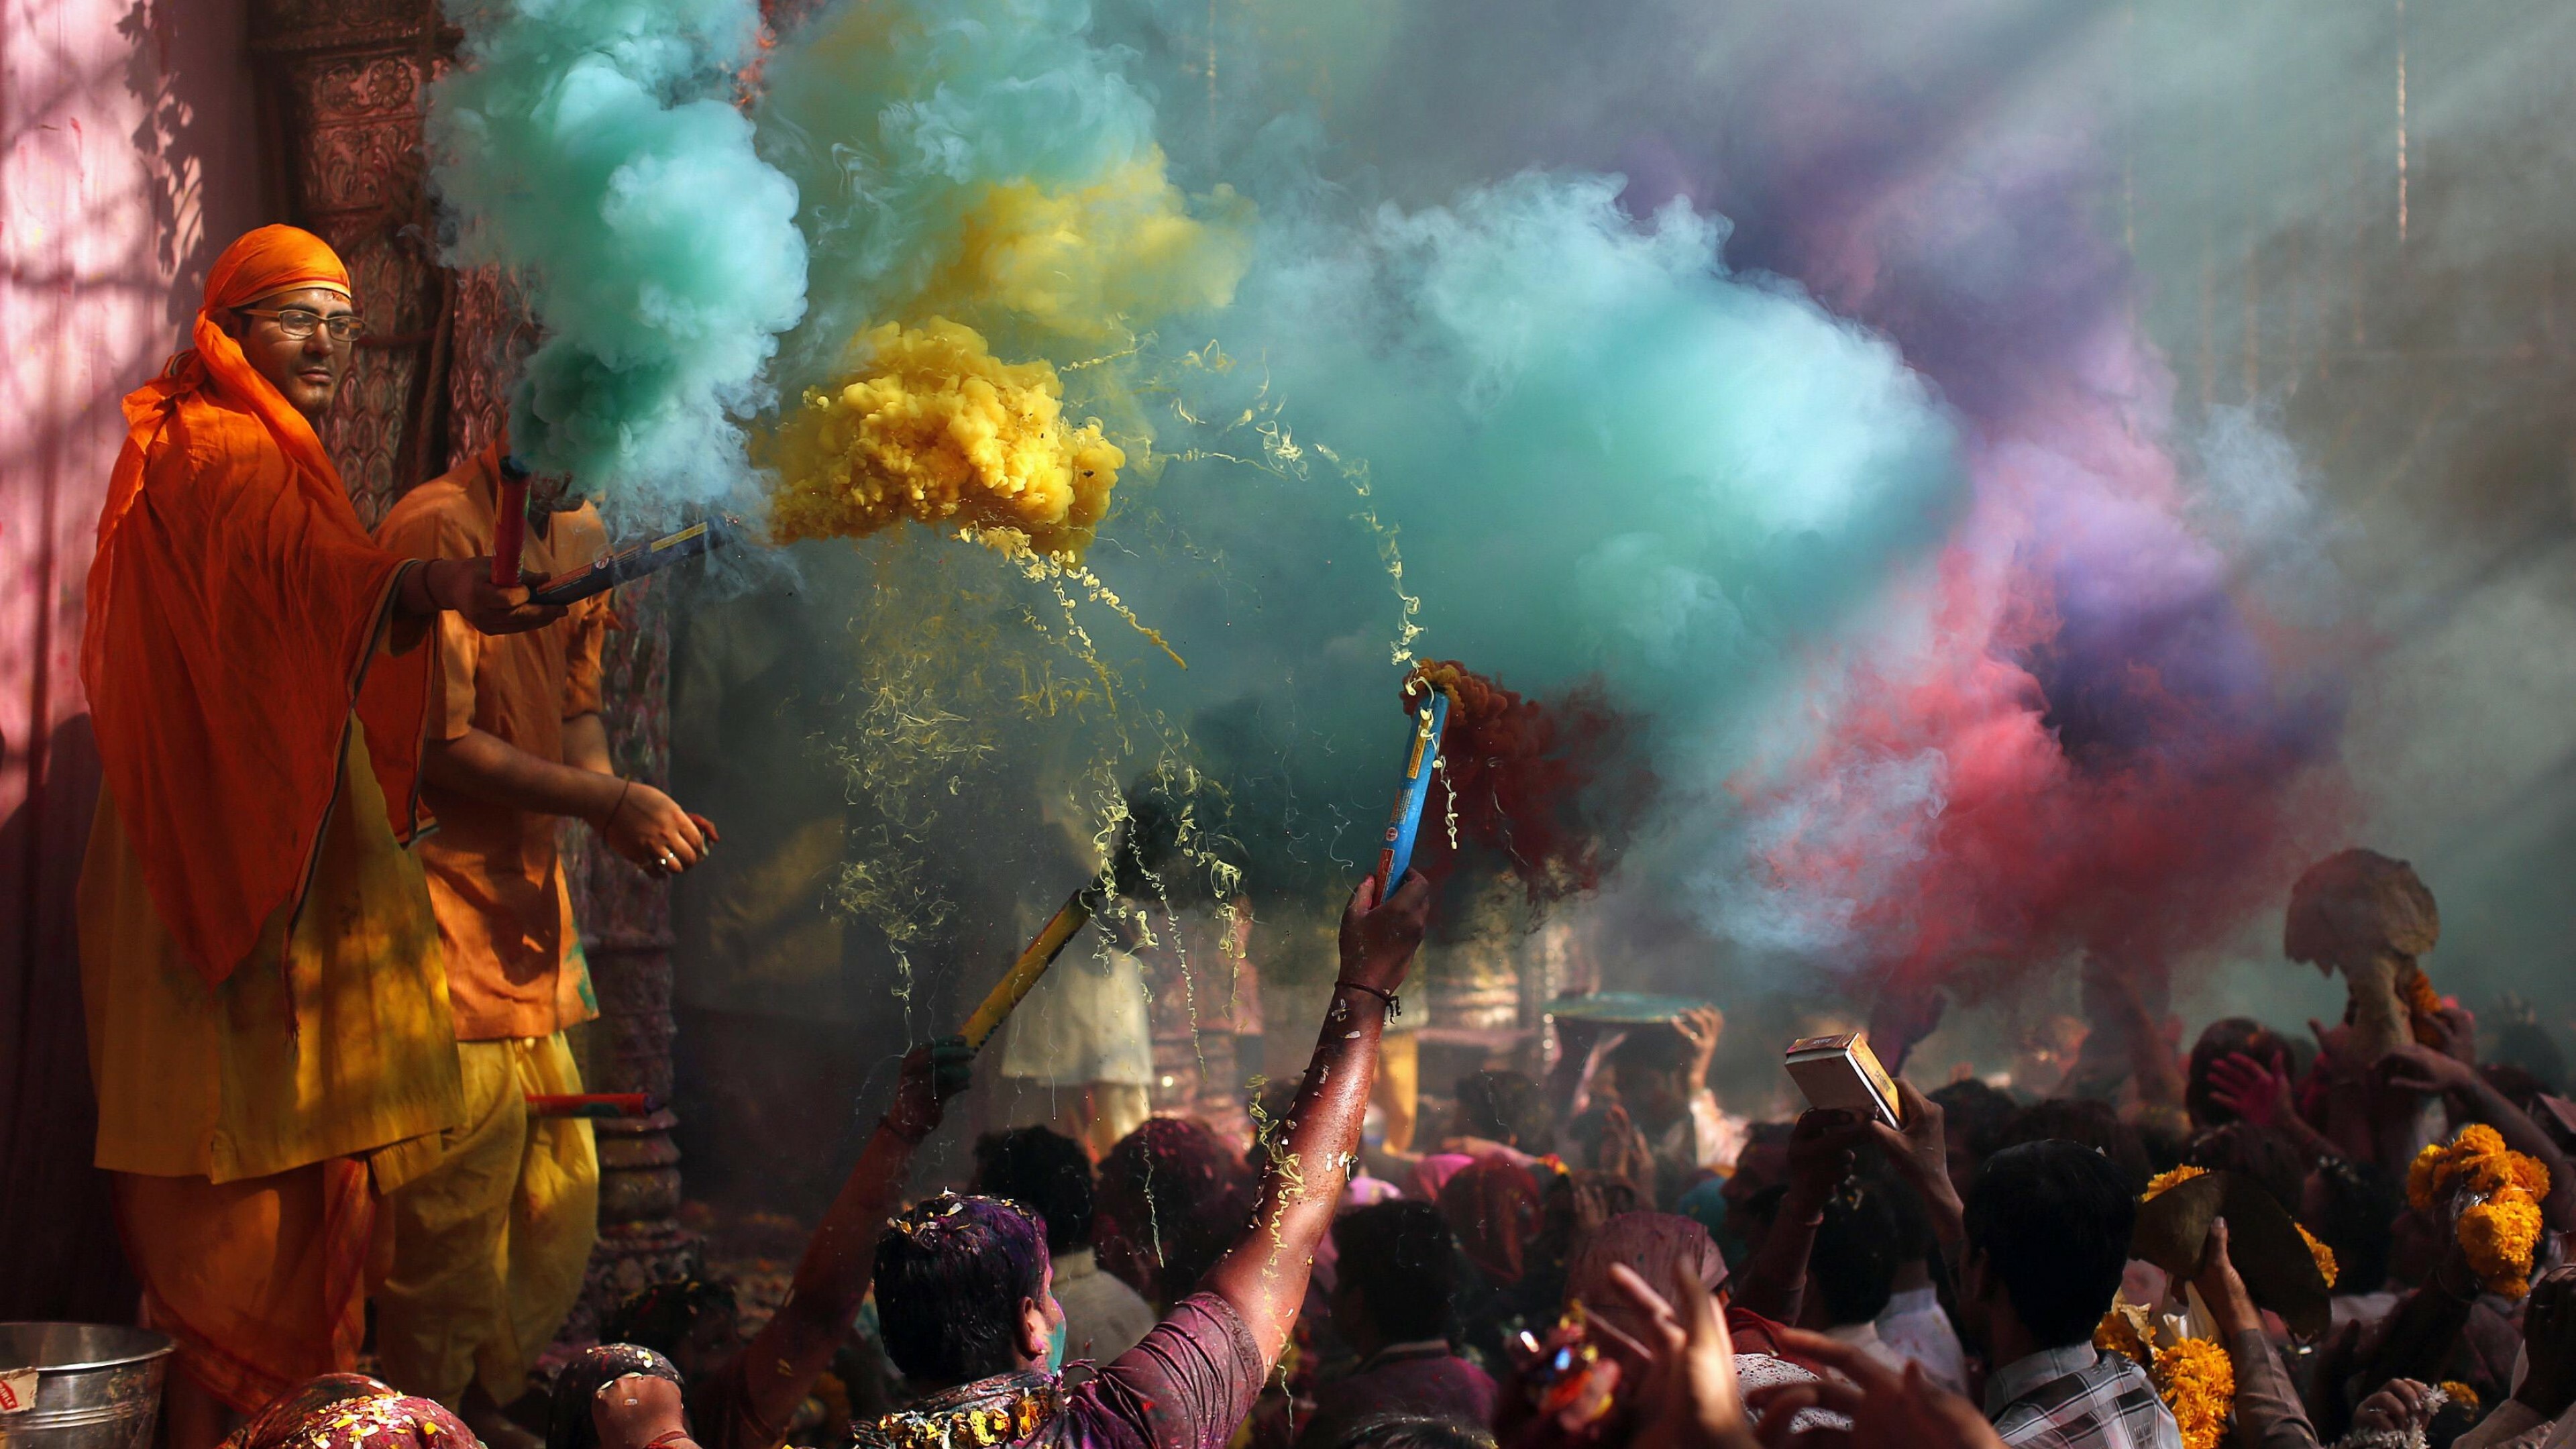 Festival: Holi, An ancient Hindu tradition, Indian holiday, Colored powder. 3840x2160 4K Wallpaper.